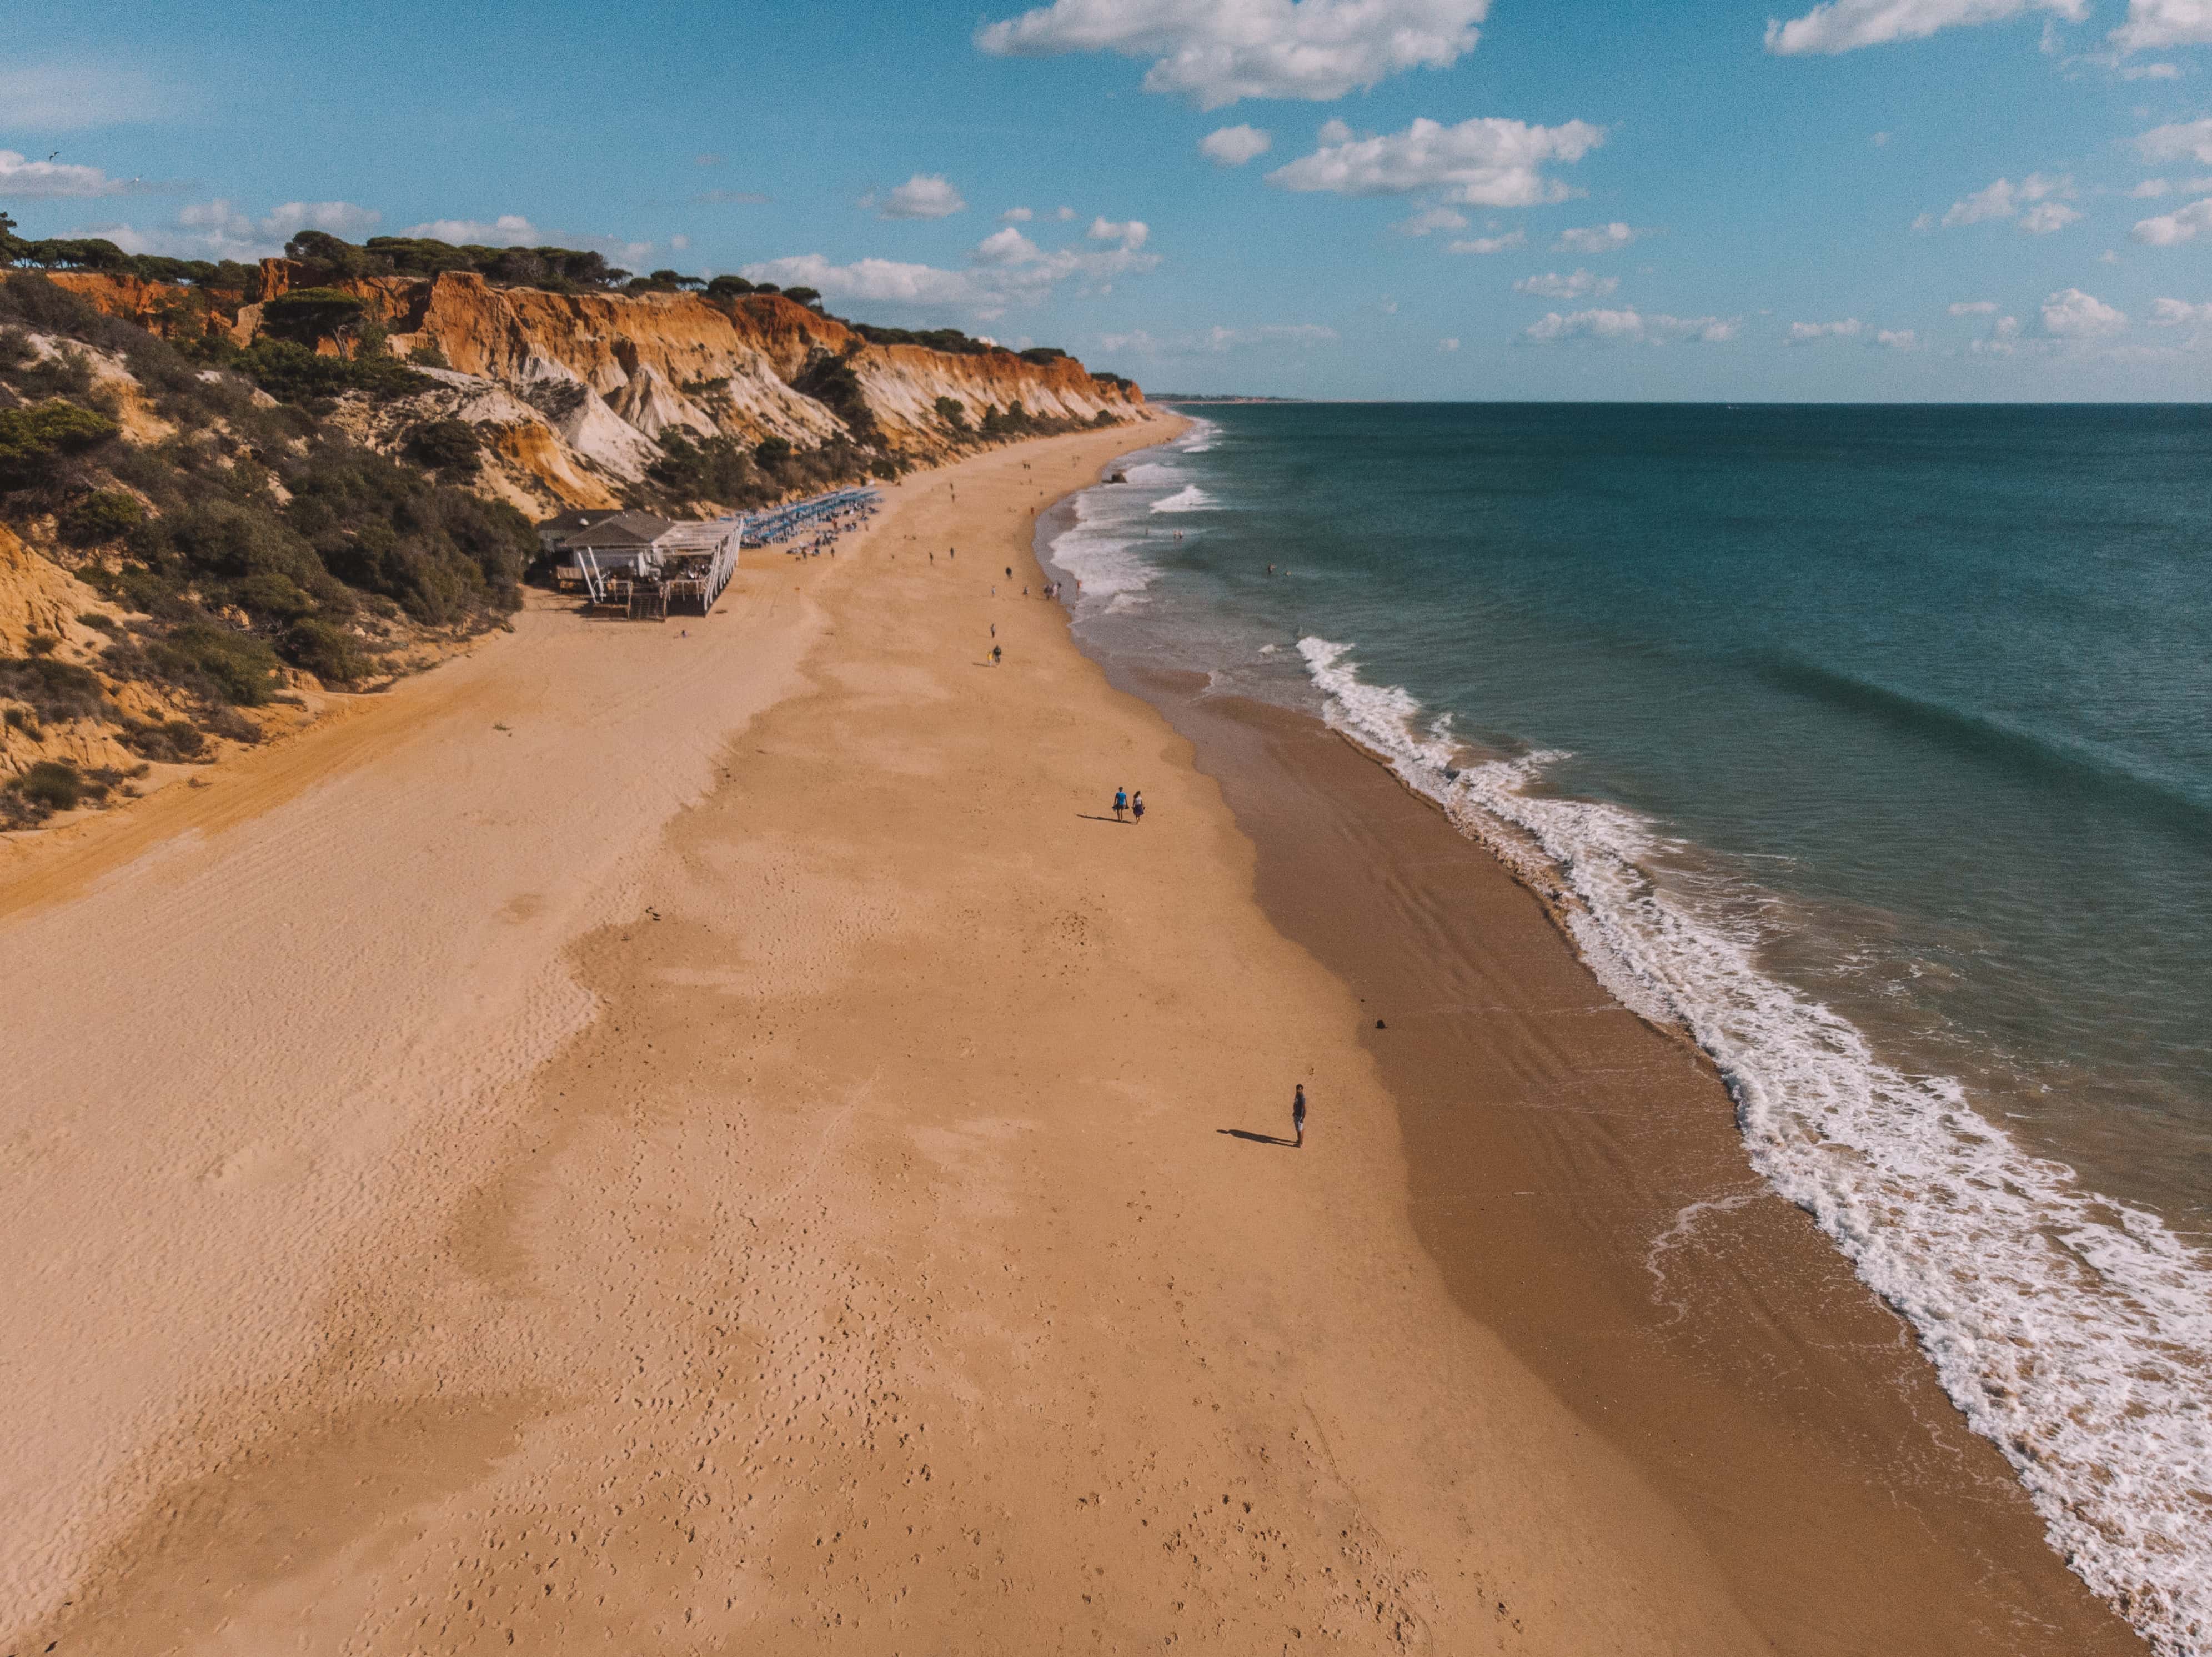 How to get to Albufeira from Lisbon, beaches in   Albufeira, where to stay in Albufeira, best time to   viit Albufeira, where to eat in Albufeira, how to get to Albufeira from Faro airport, Olhos de Agua